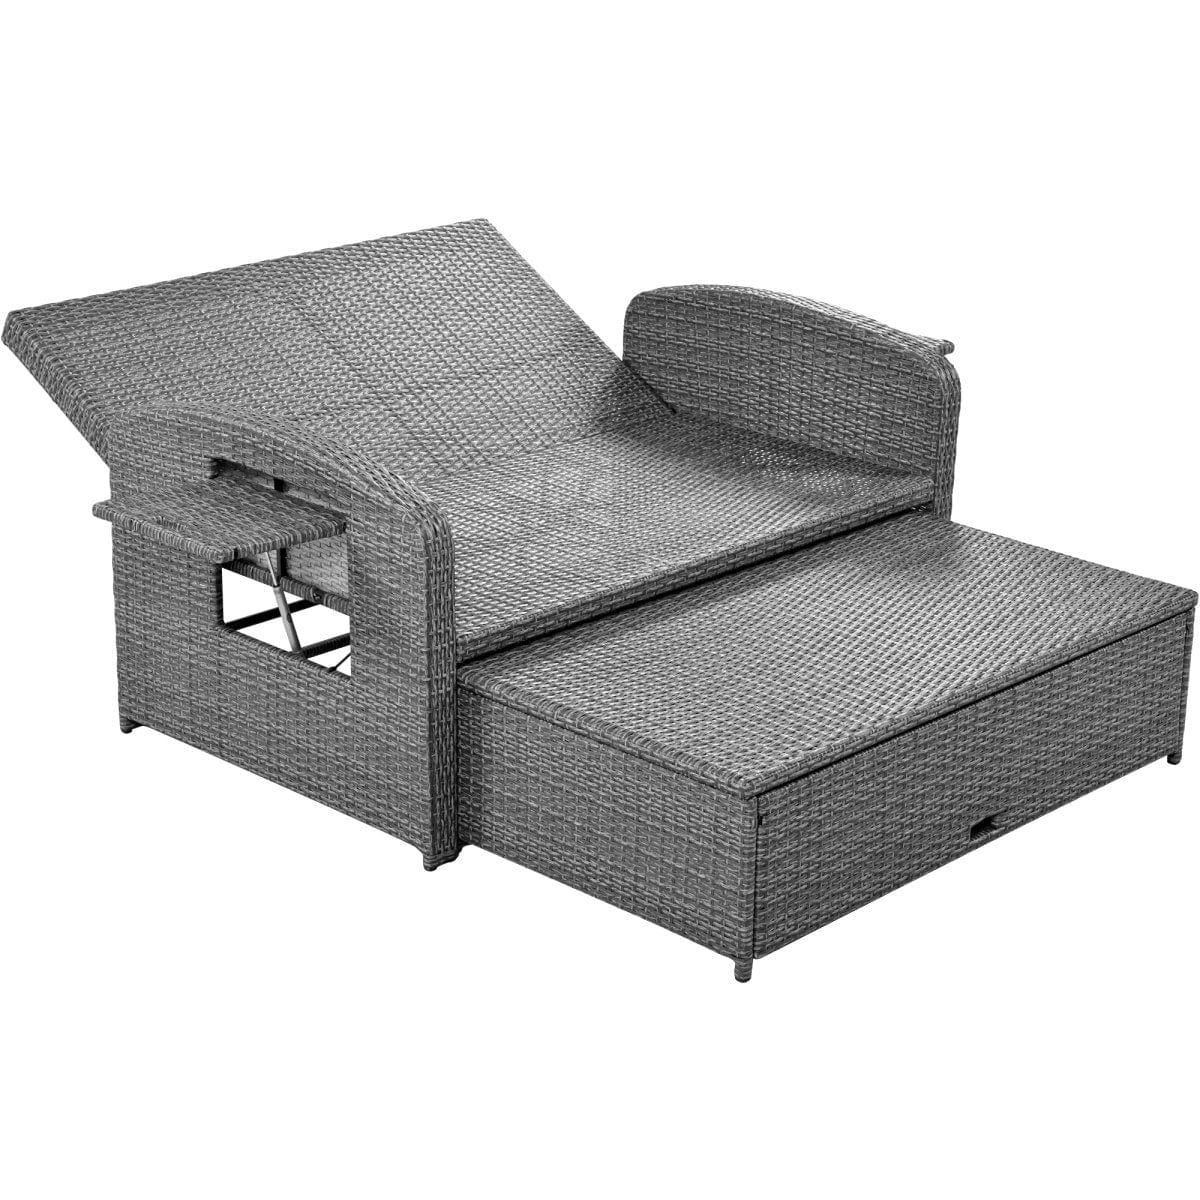 2 Person Outdoor Daybed with Built-in Tables18Topmaxx